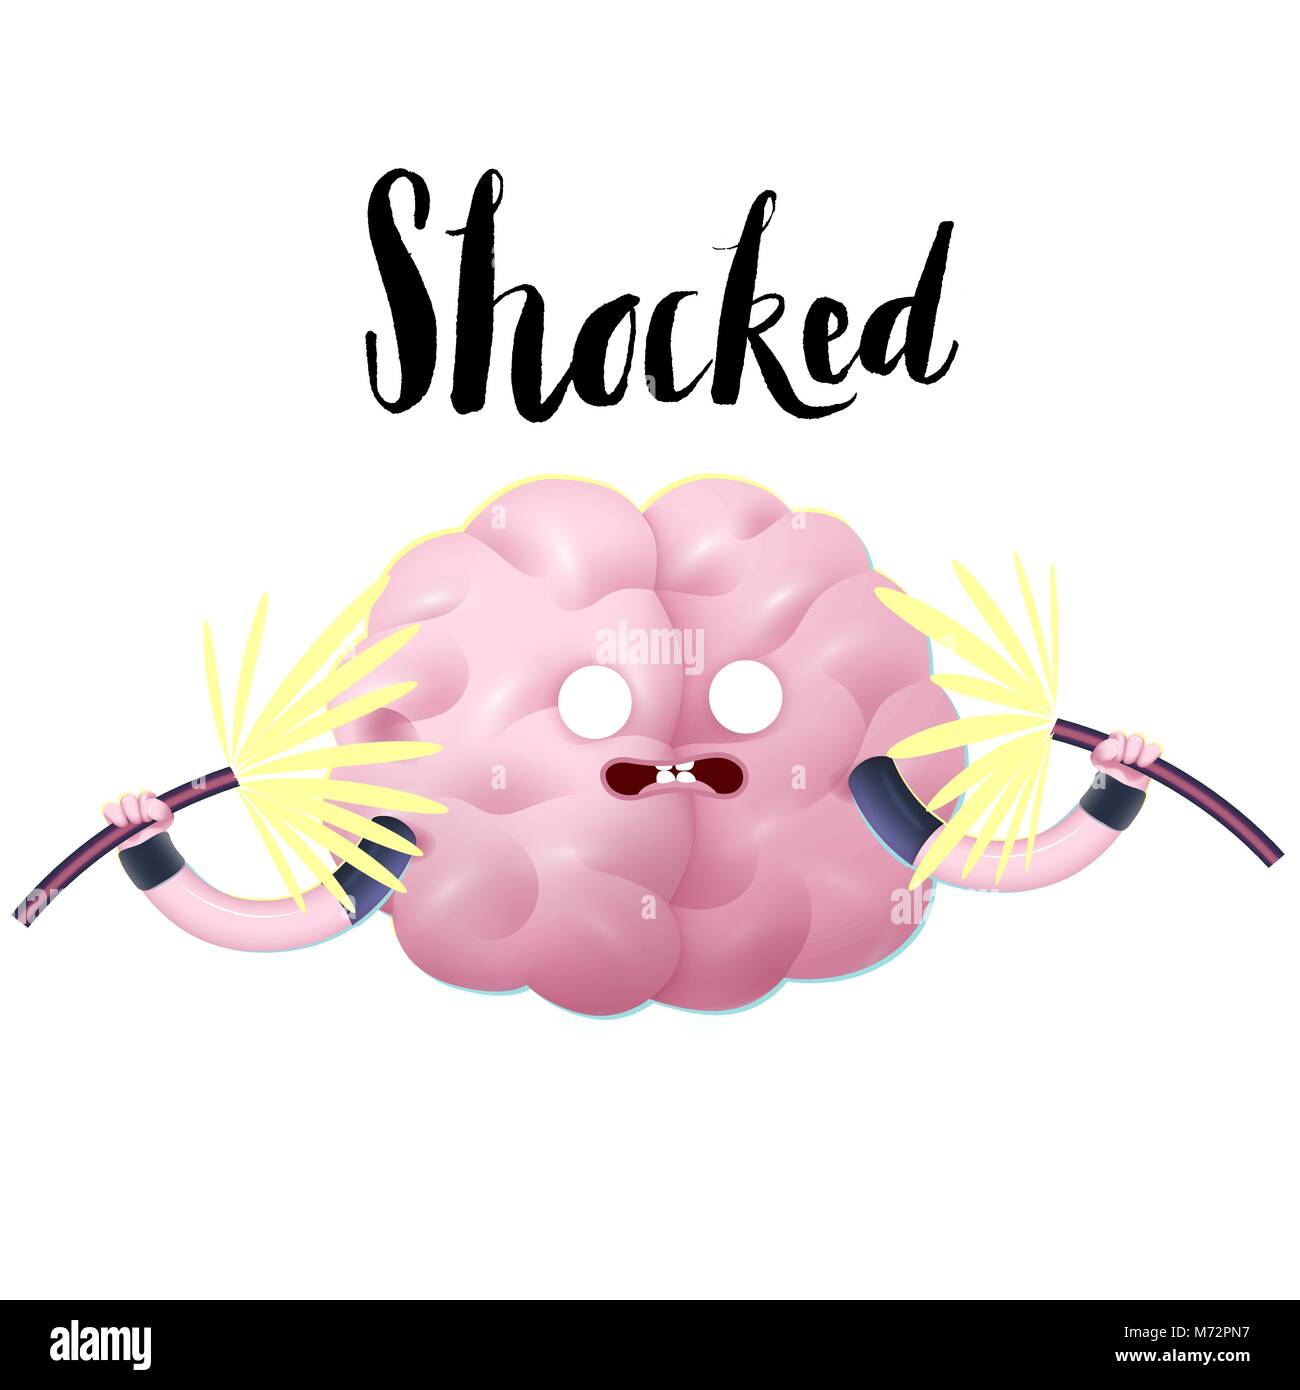 Shocked brain holding two sparking electrical cables cartoon illustration and lettering - train your brain series. Part of the Brain collection. Stock Vector